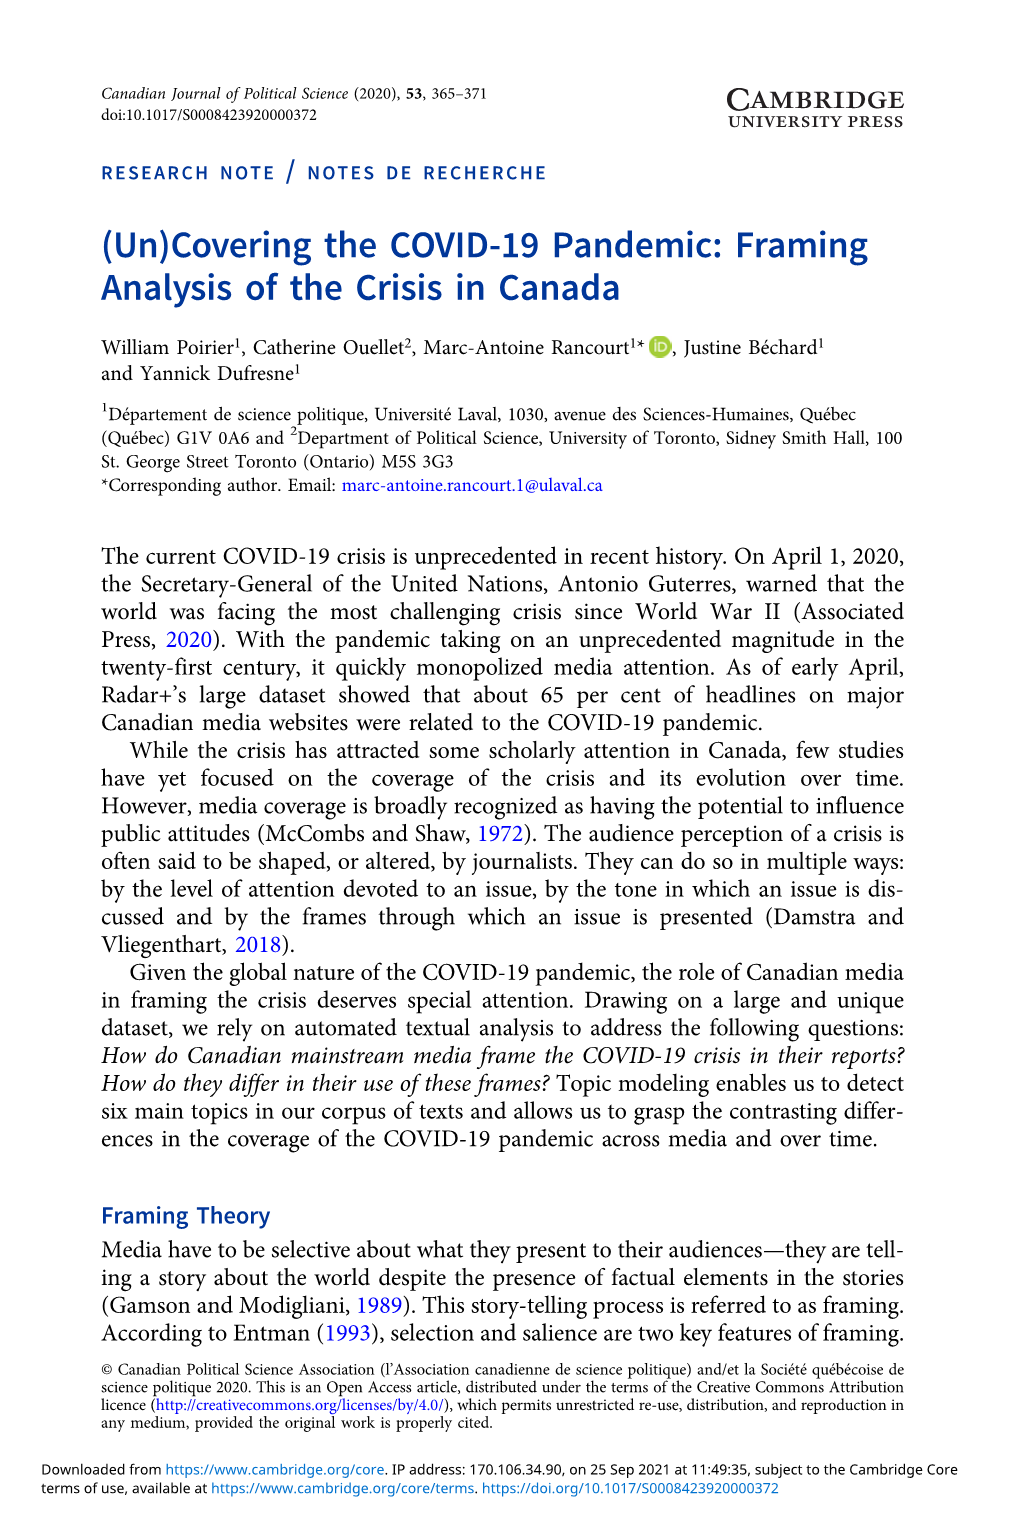 Covering the COVID-19 Pandemic: Framing Analysis of the Crisis in Canada